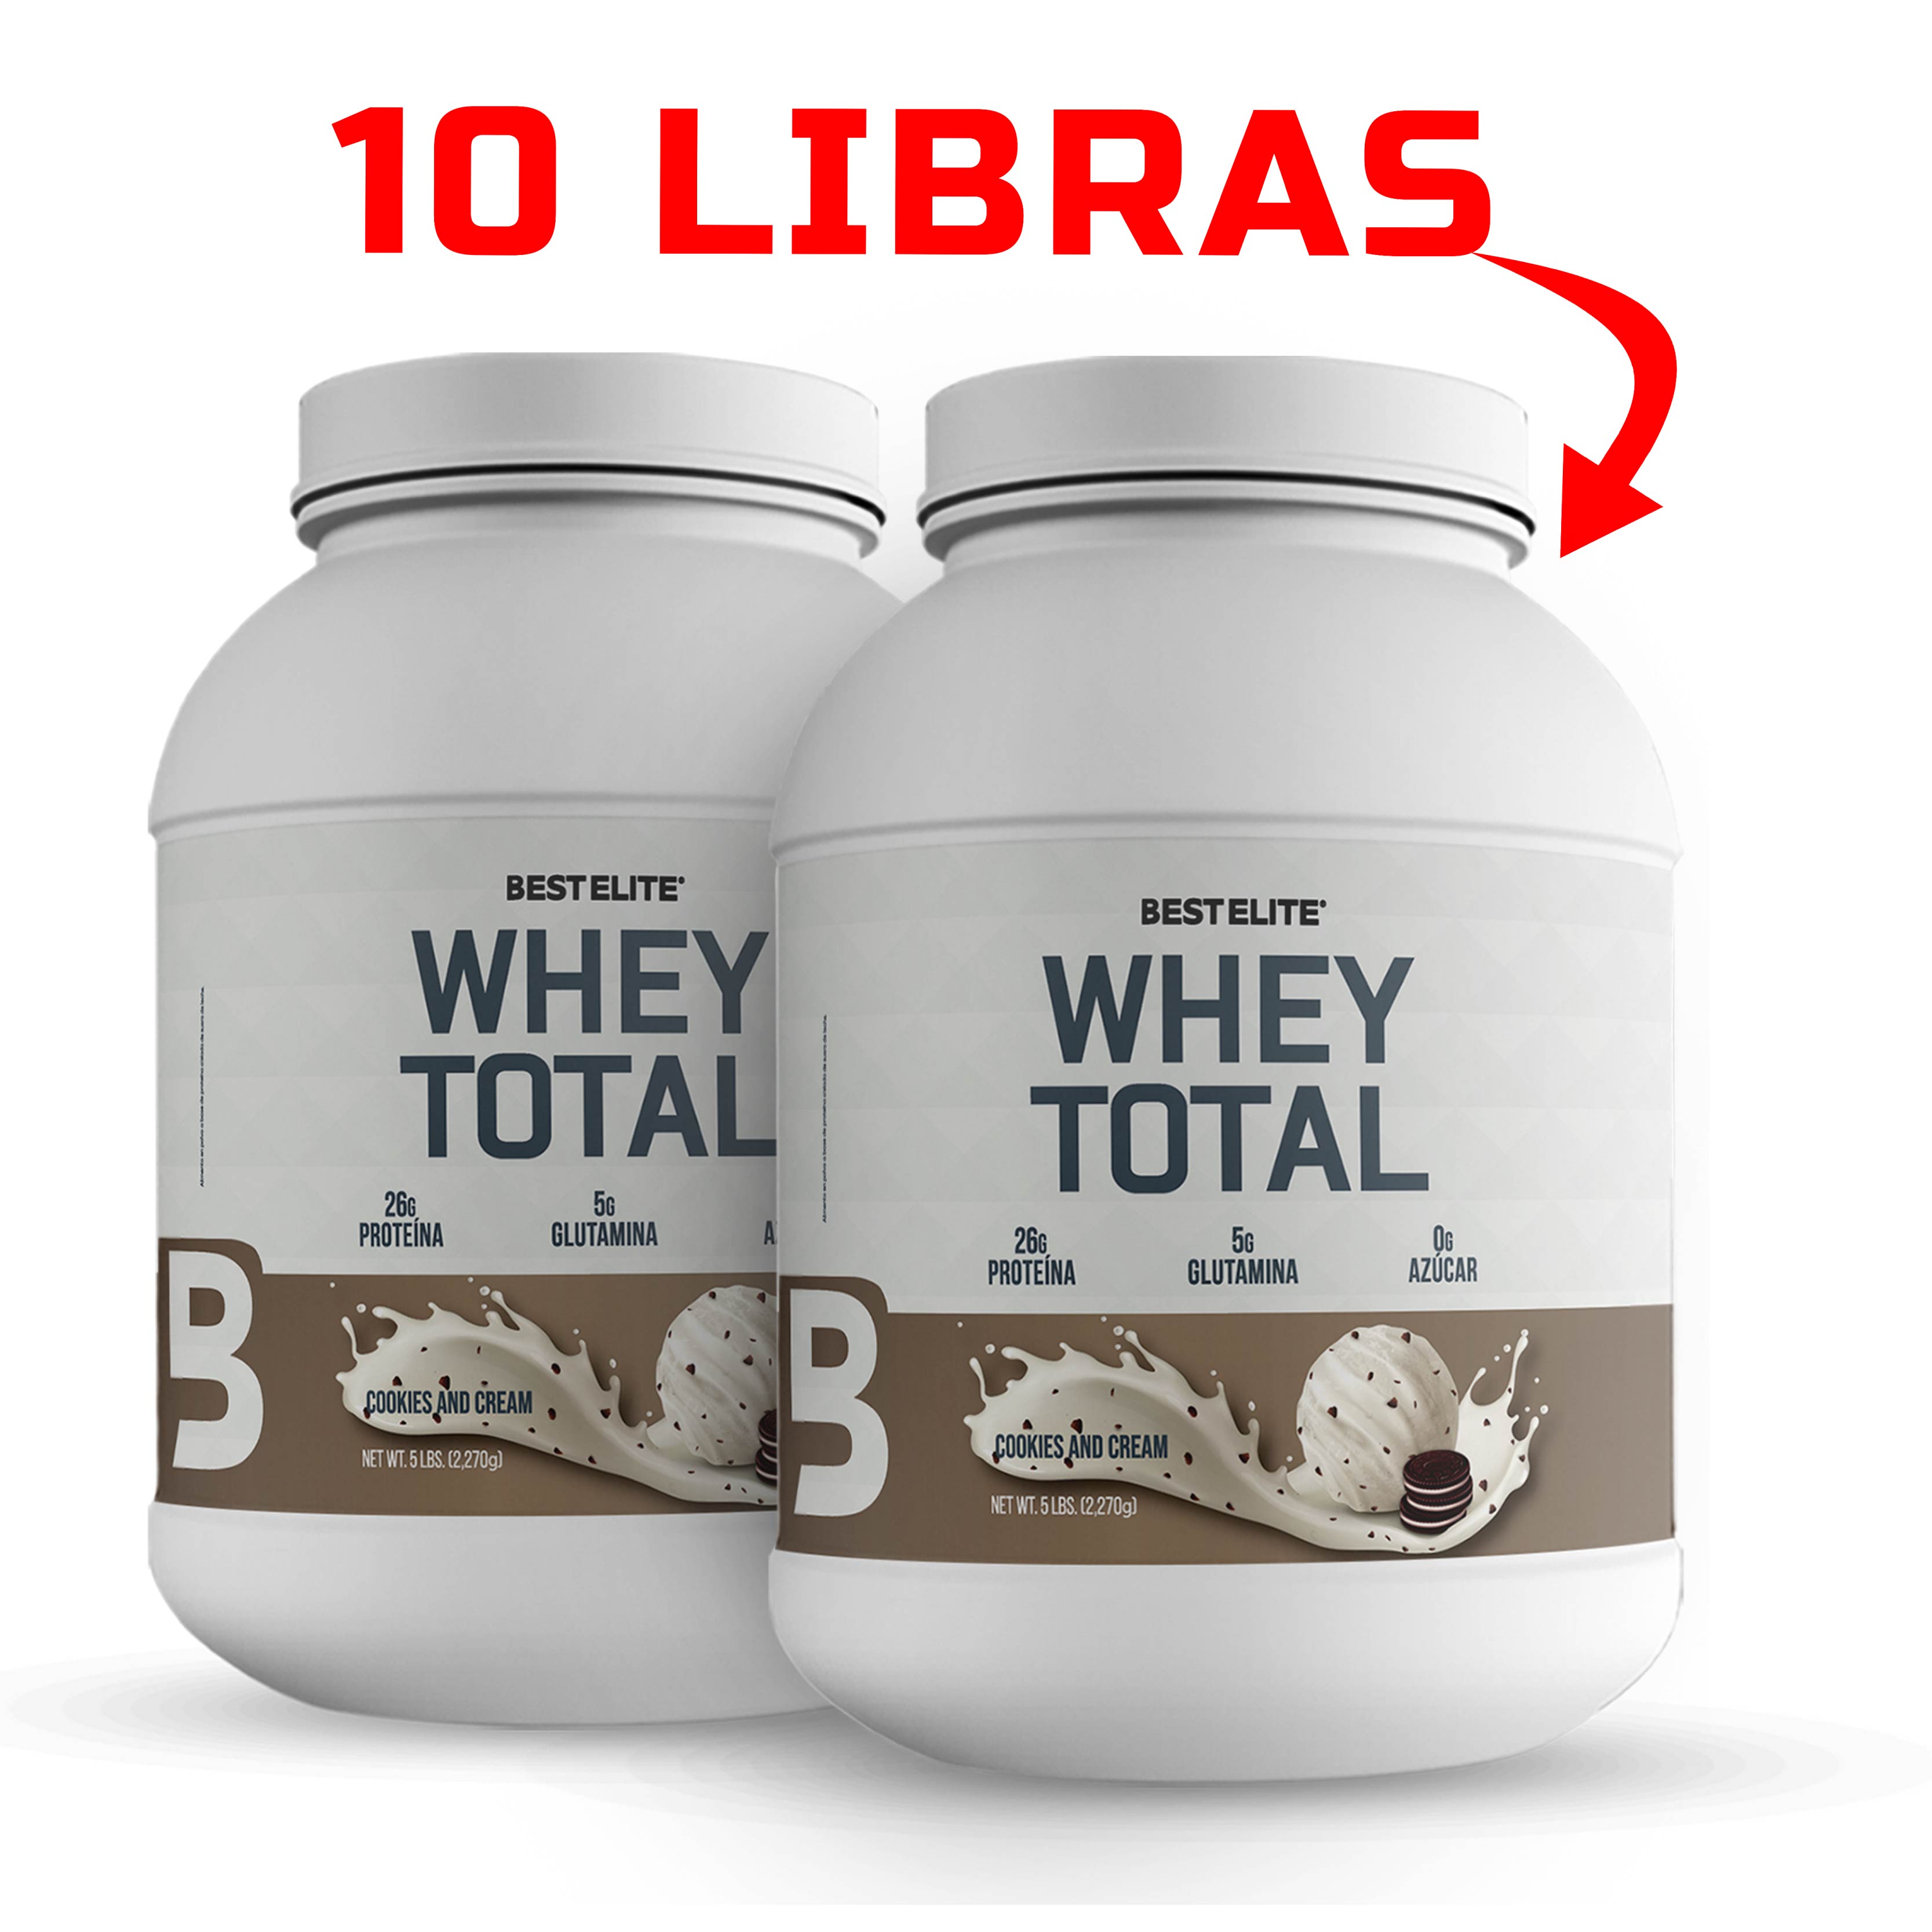 WHEY TOTAL 10 LIBRAS COOKIES AND CREAM – BEST ELITE